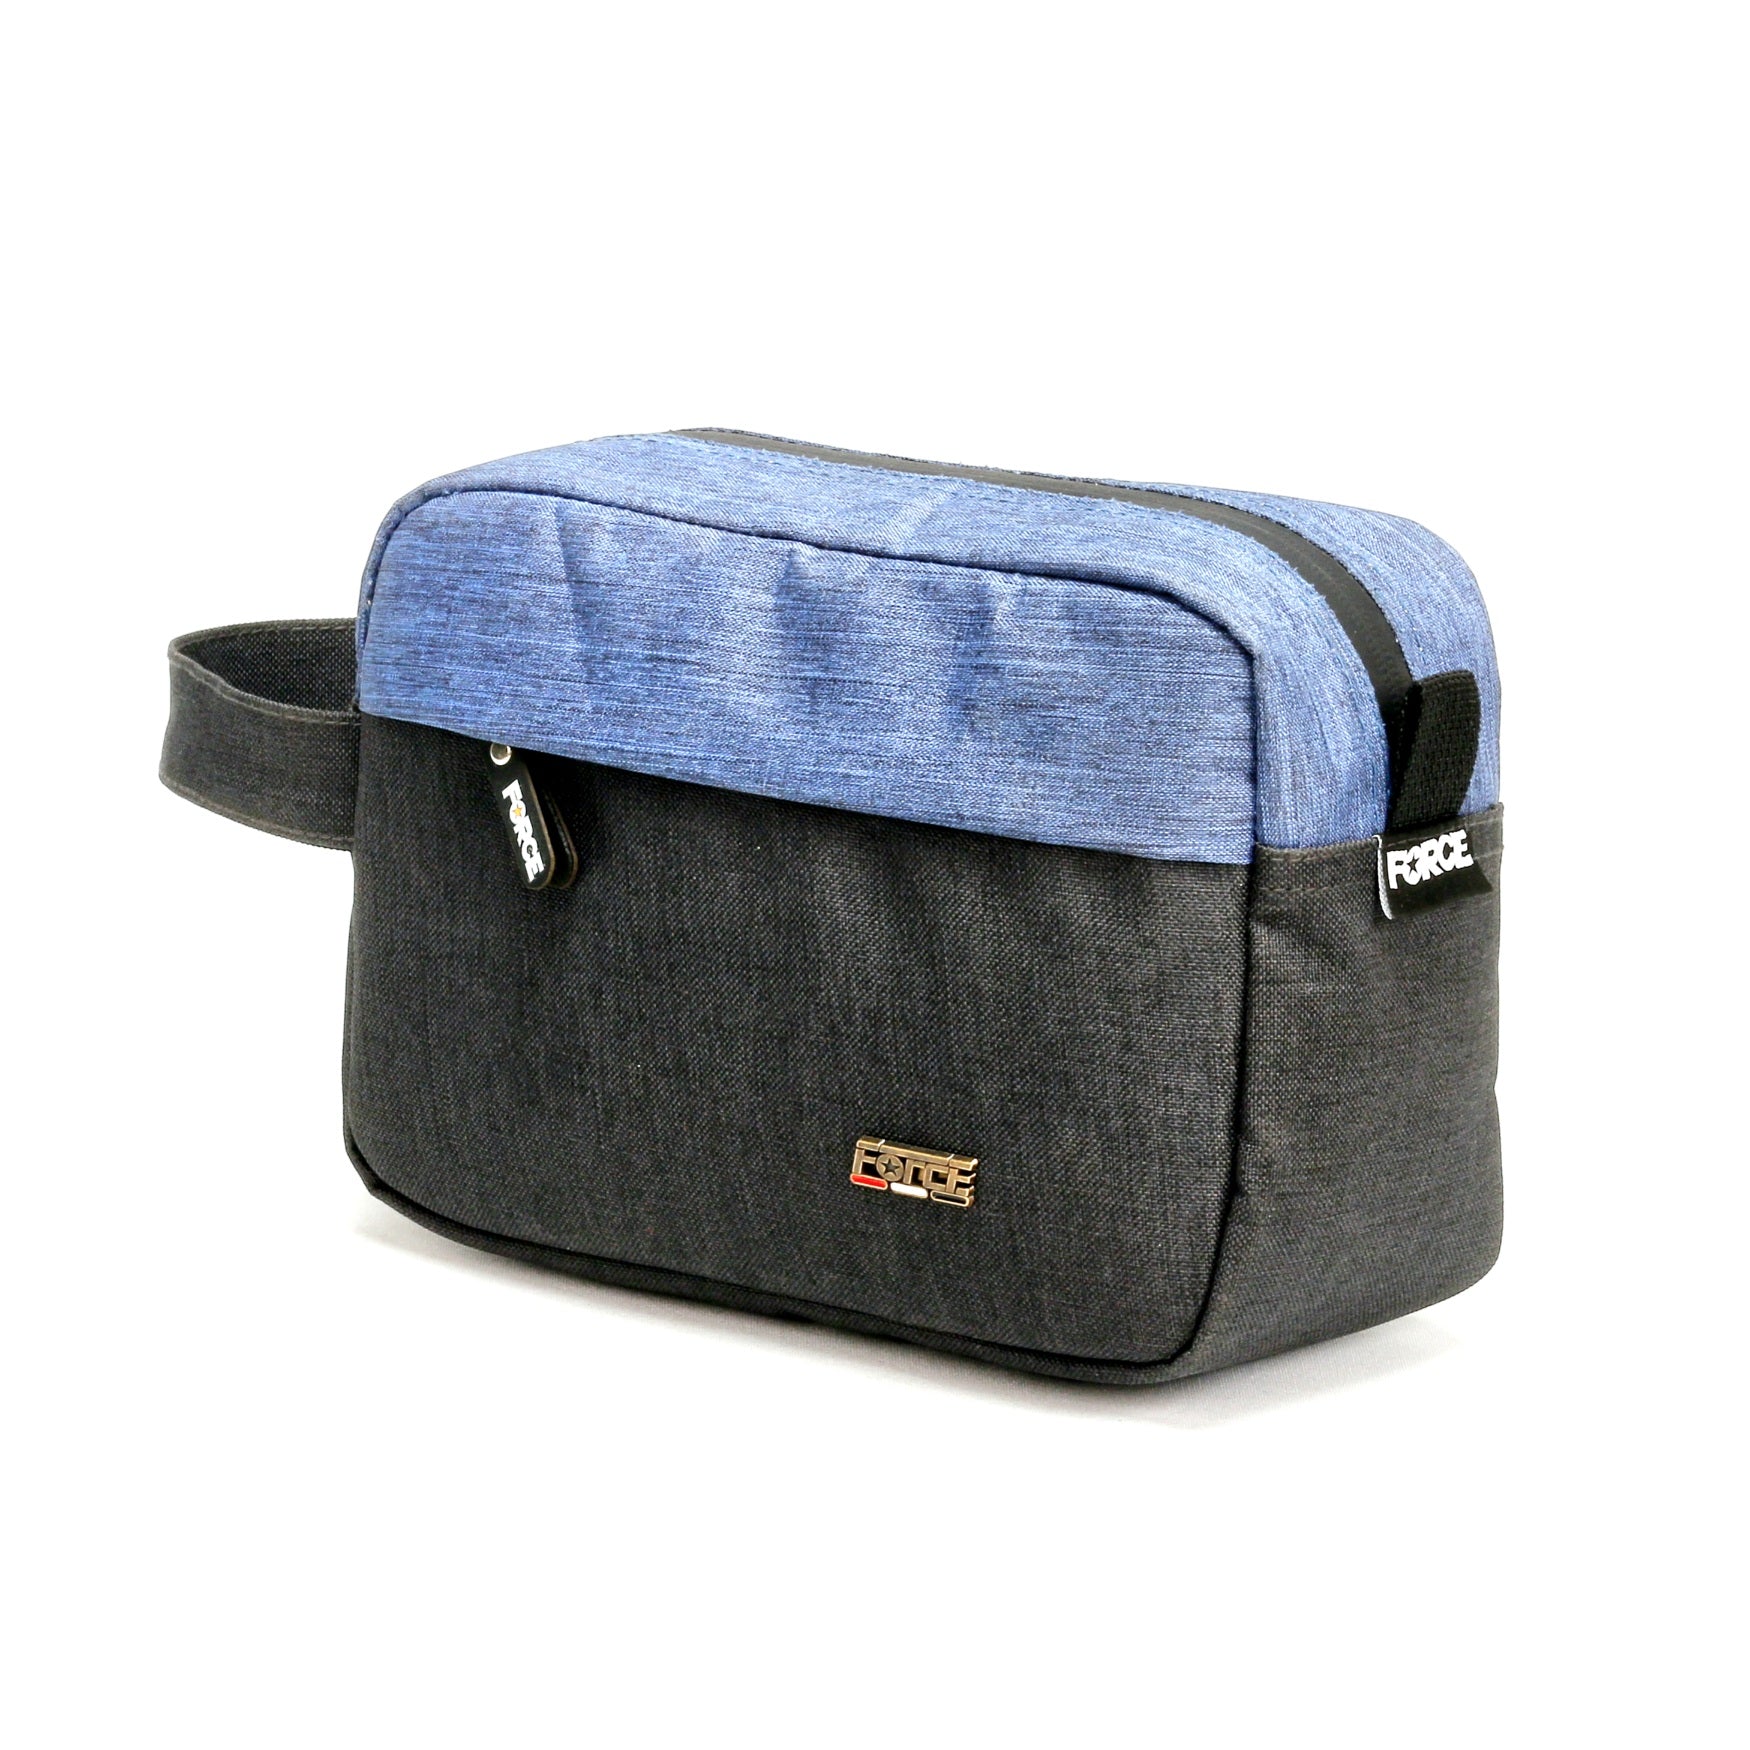 Force Linen Accessories and Toiletry Handbag - Gray / blue - Unisex-FCN009 - FORCE STORES